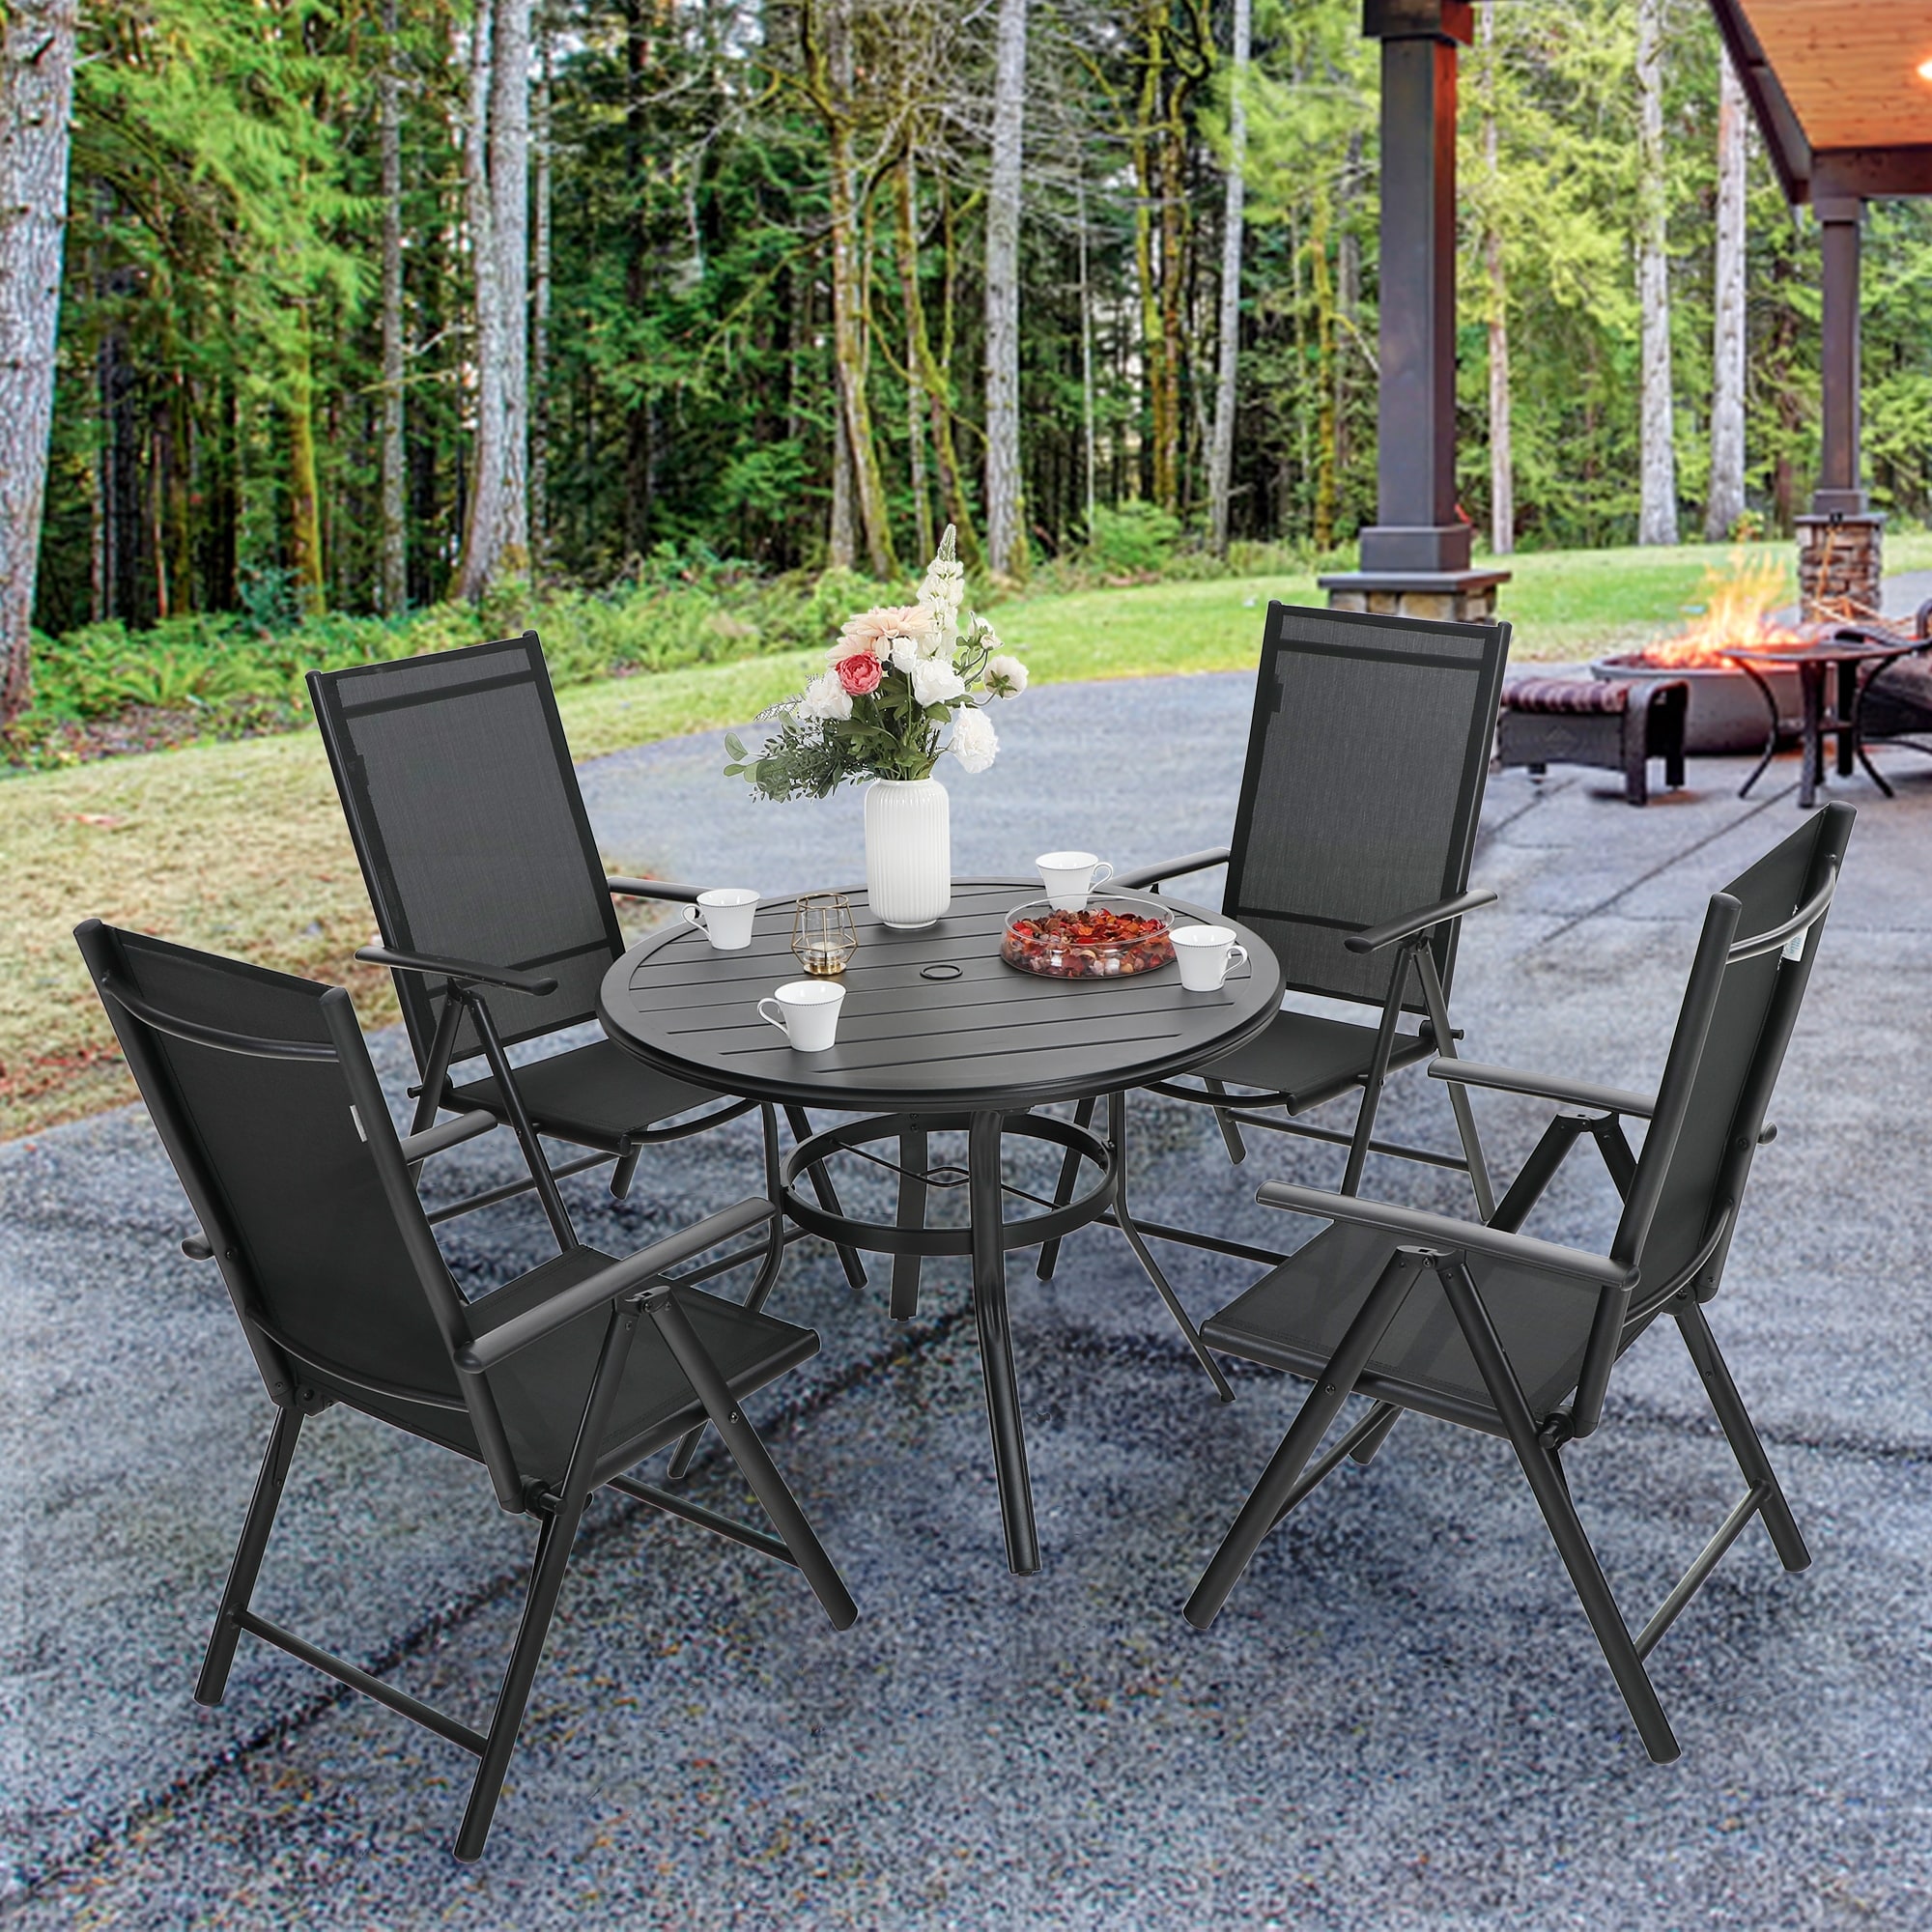 Phi Villa 5 Piece Patio Dining Set, Round Metal Steel Dining Table With 1.57"umbrella Hole And 4 Adjustable Folding Chairs